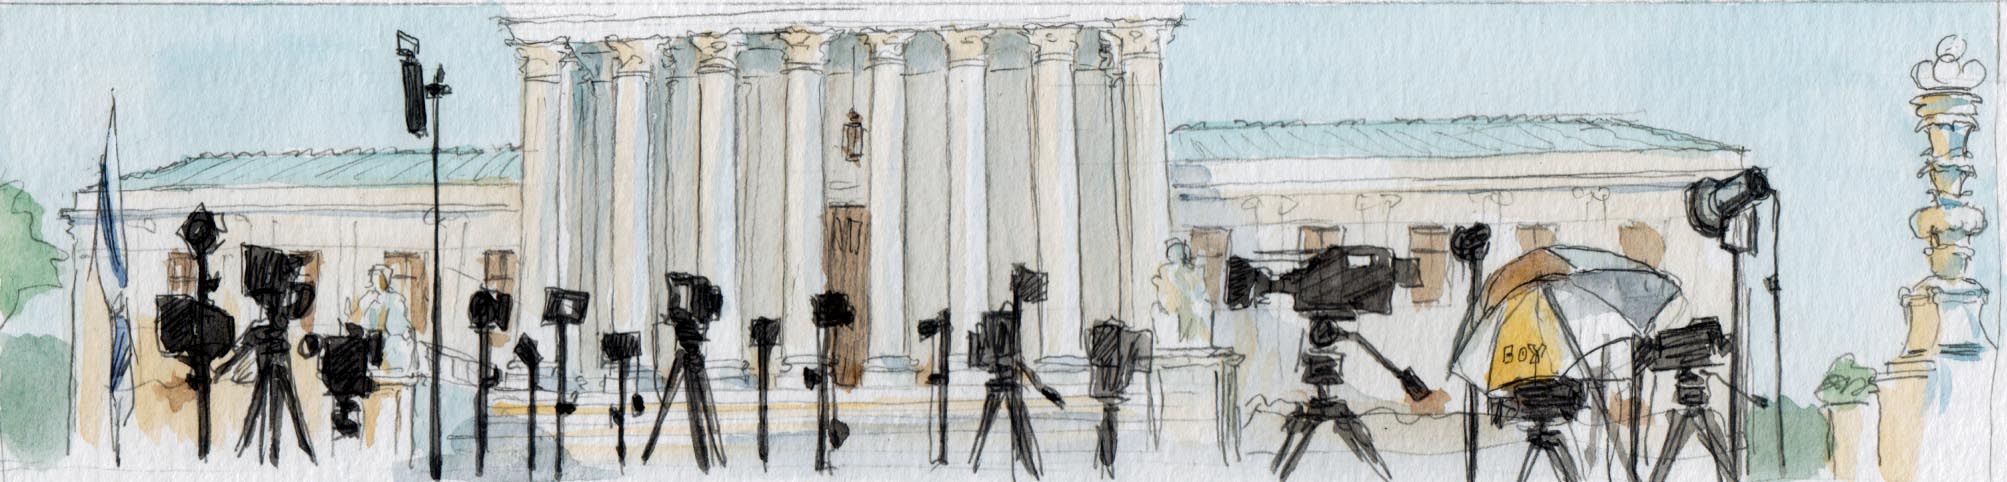 sketch of numerous cameras lined up outside the supreme court